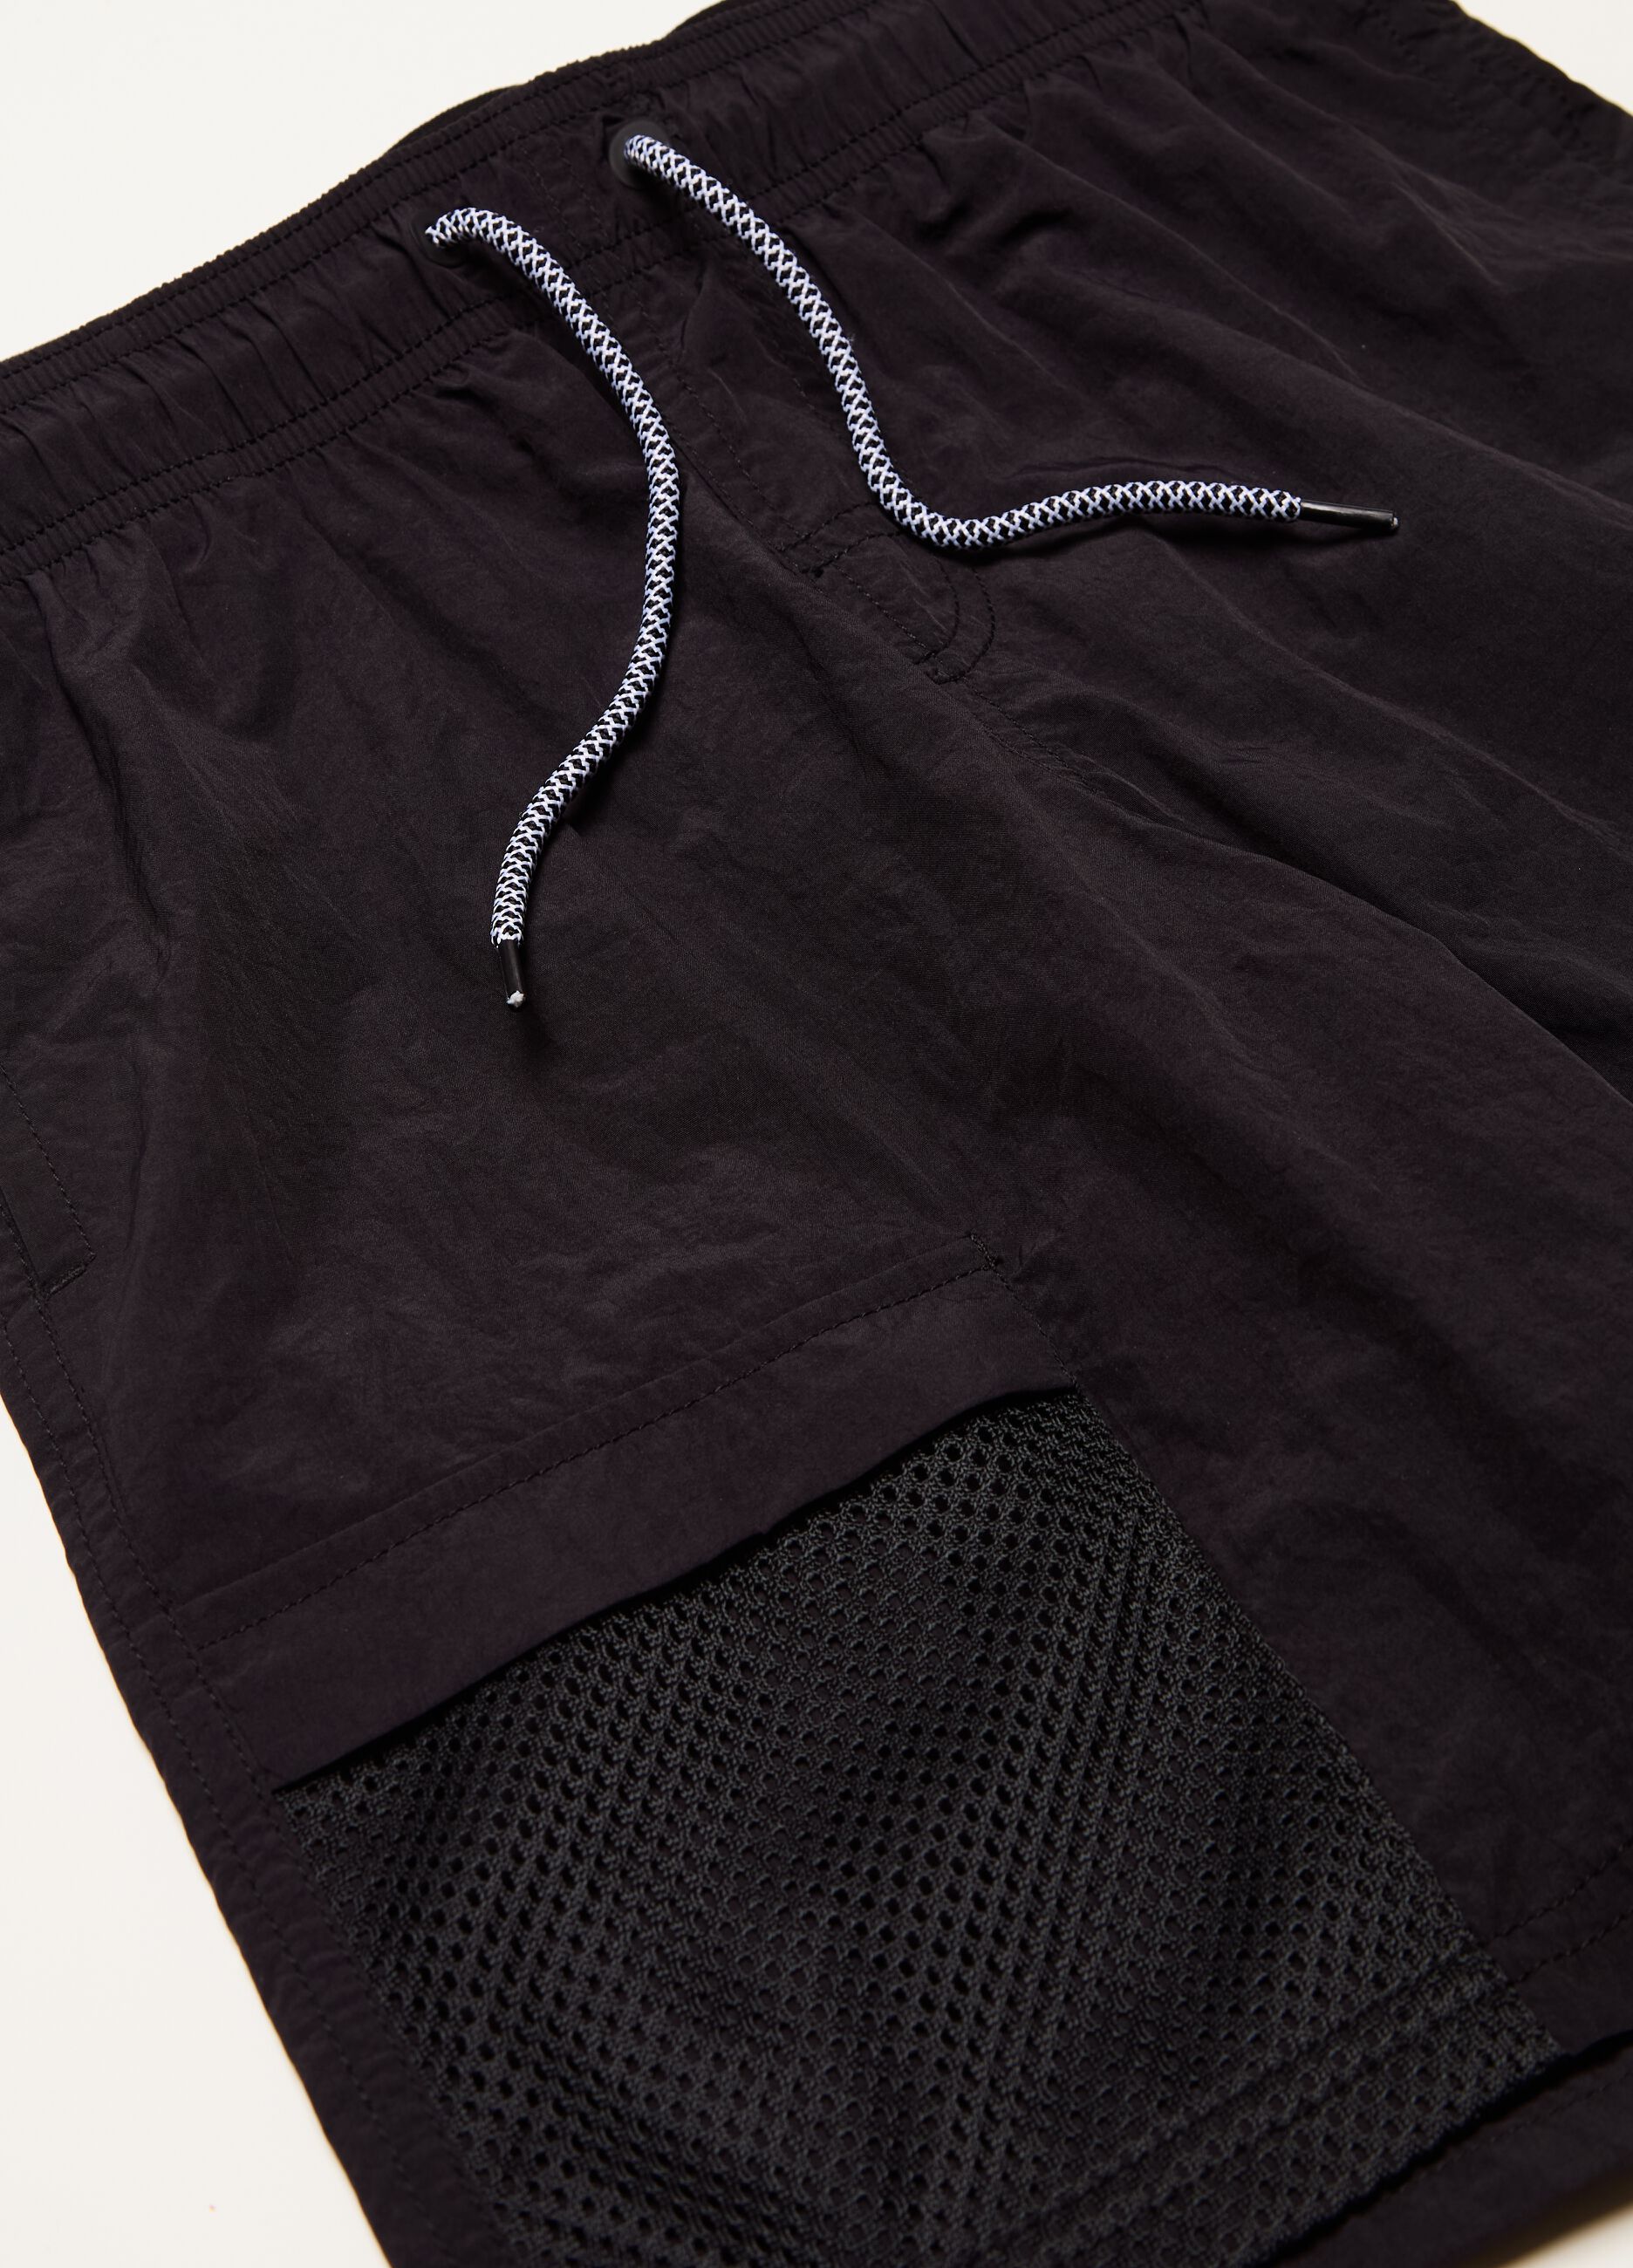 Swimming trunks with external elastic